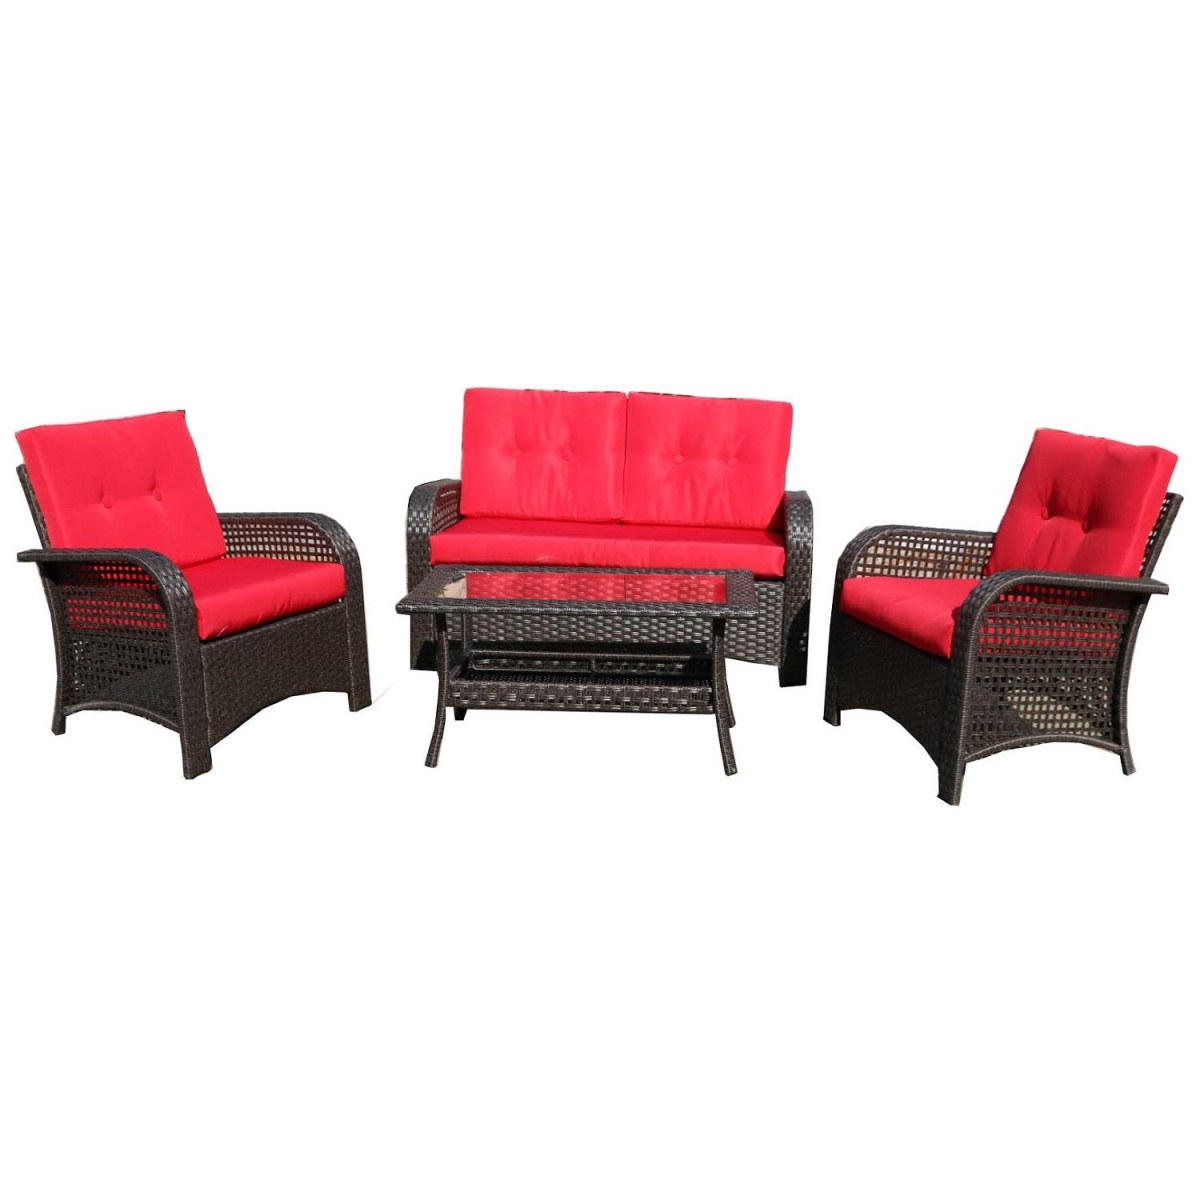 32591323 4 Piece Brown Resin Wicker Outdoor Patio Furniture Set - Red Cushions